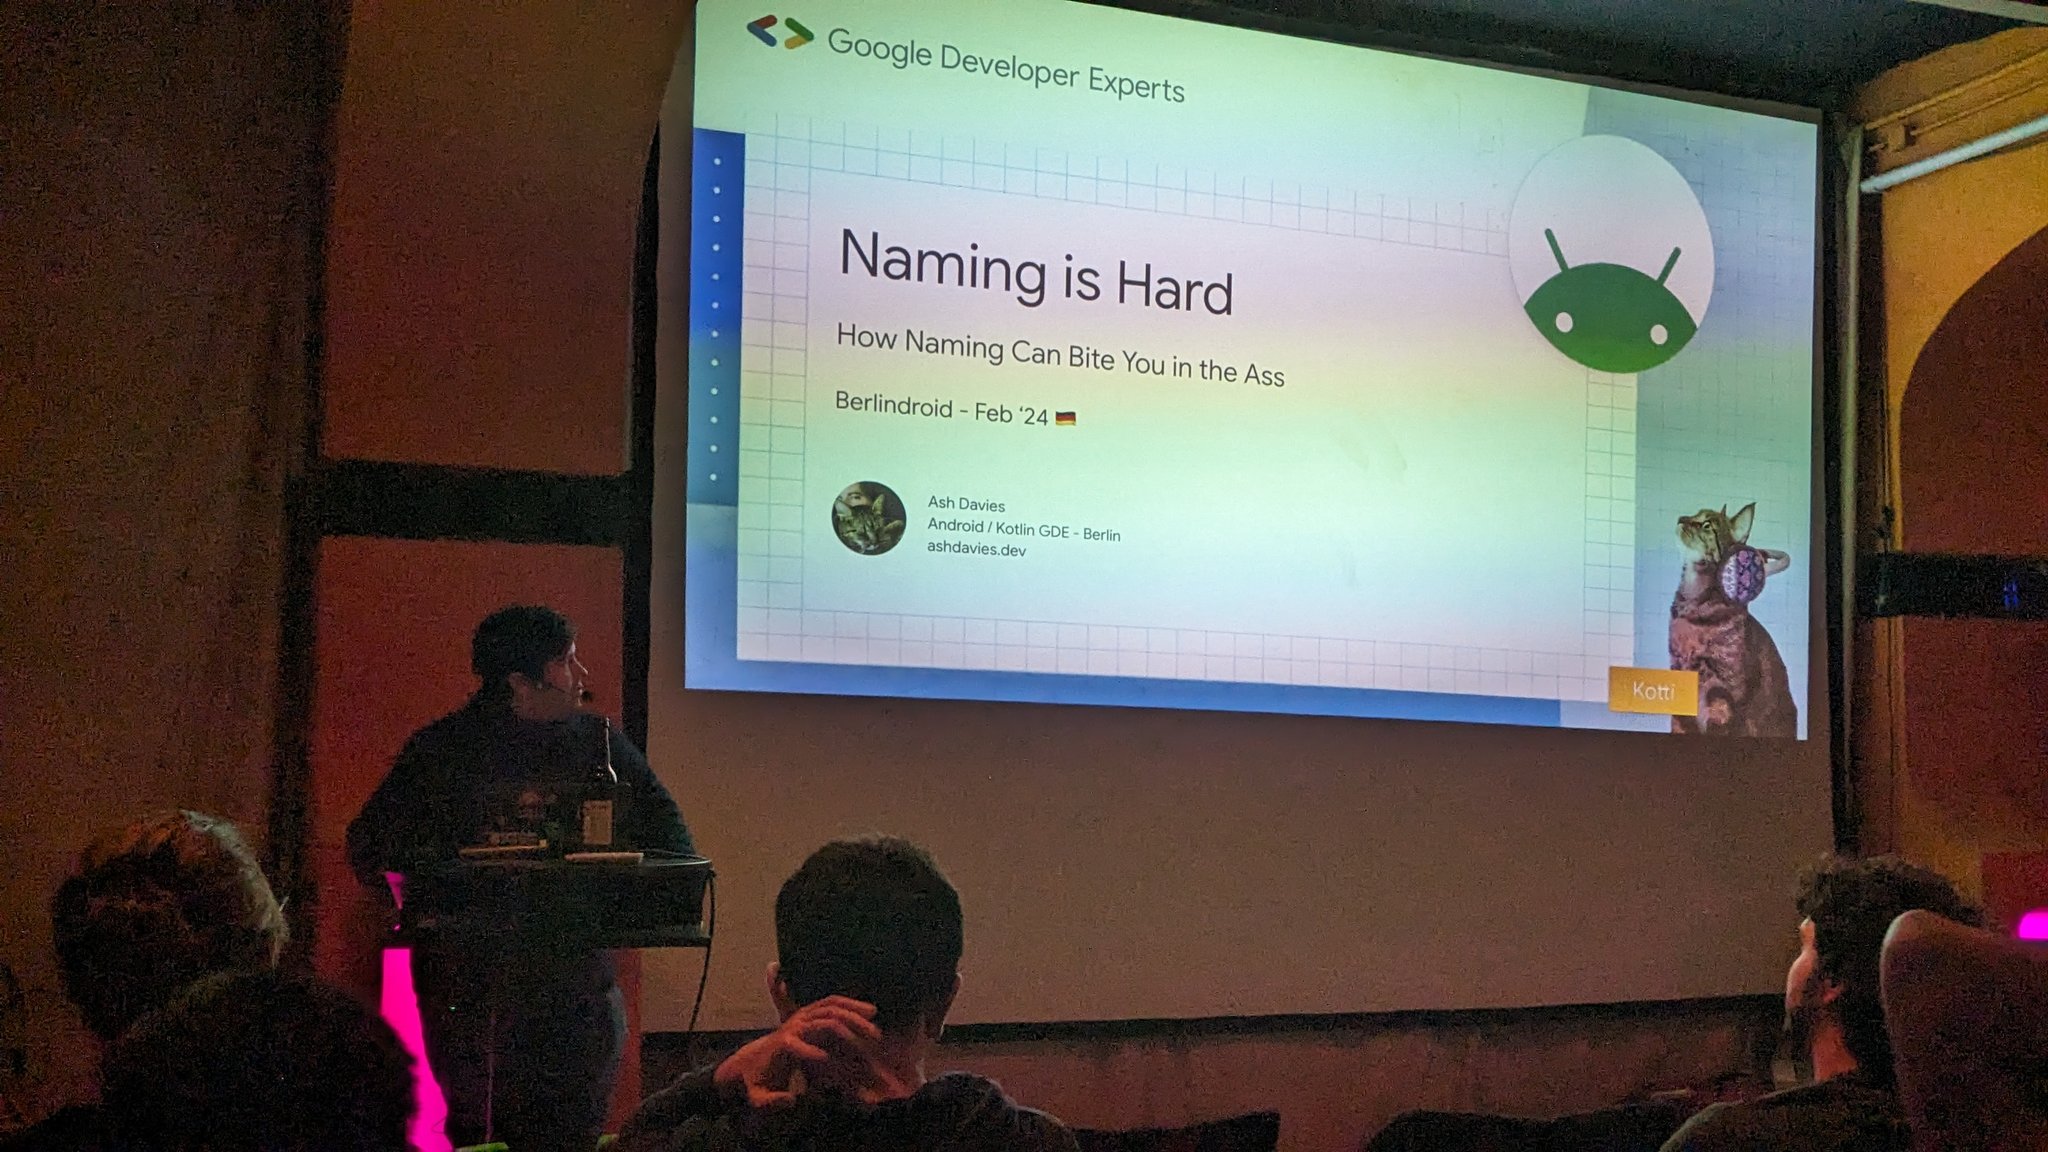 Berlindroid: Naming is Hard